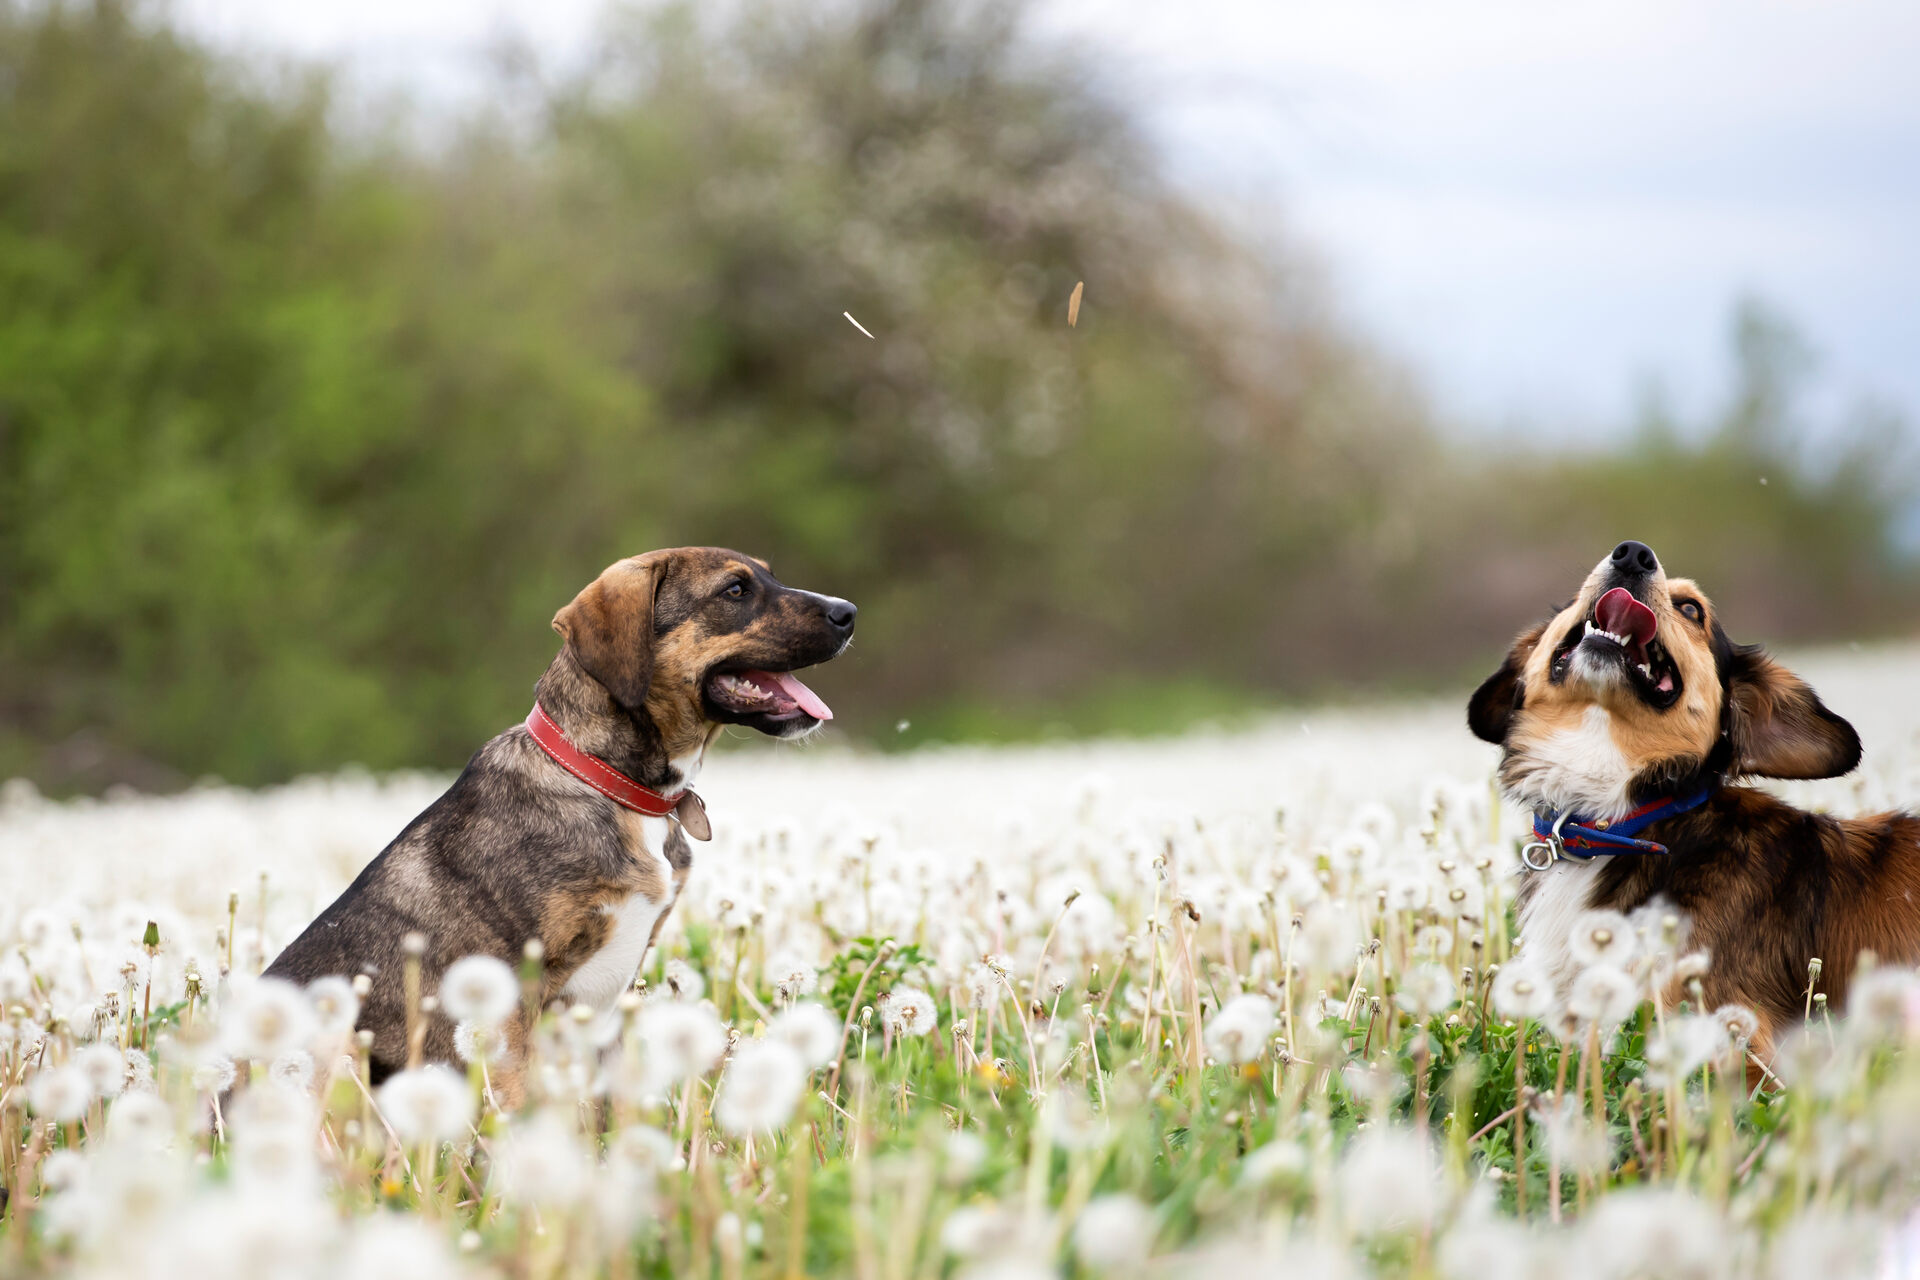 Two dogs playing in a dandelion field